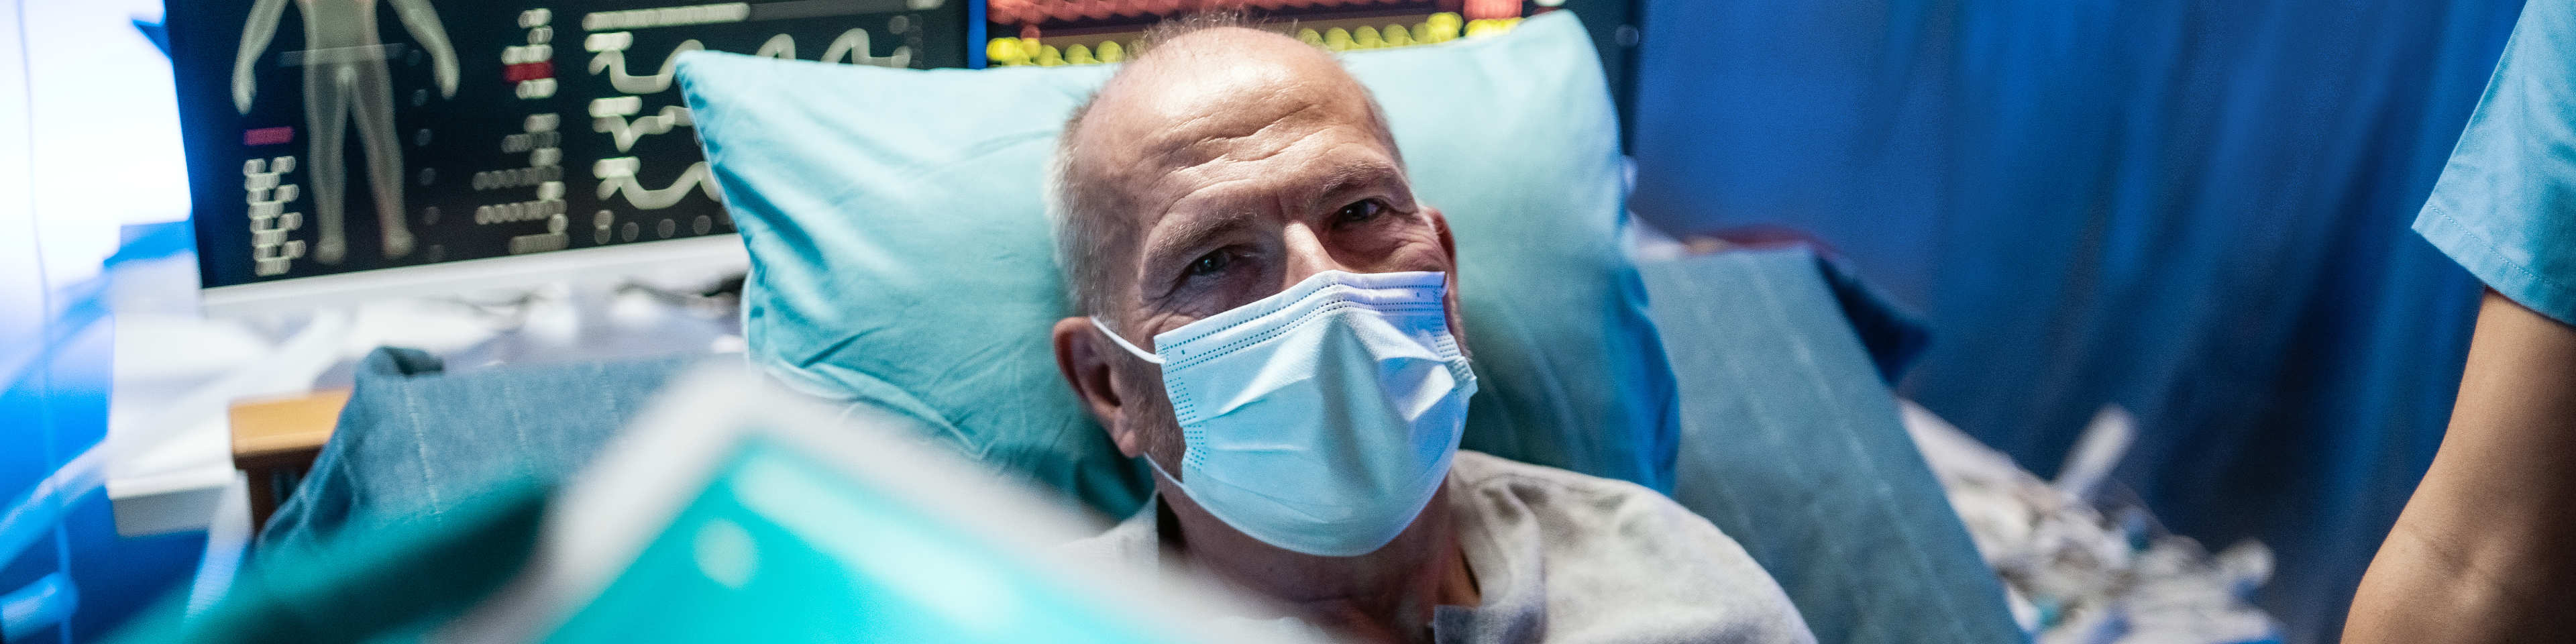 mature man patient in hospital bed